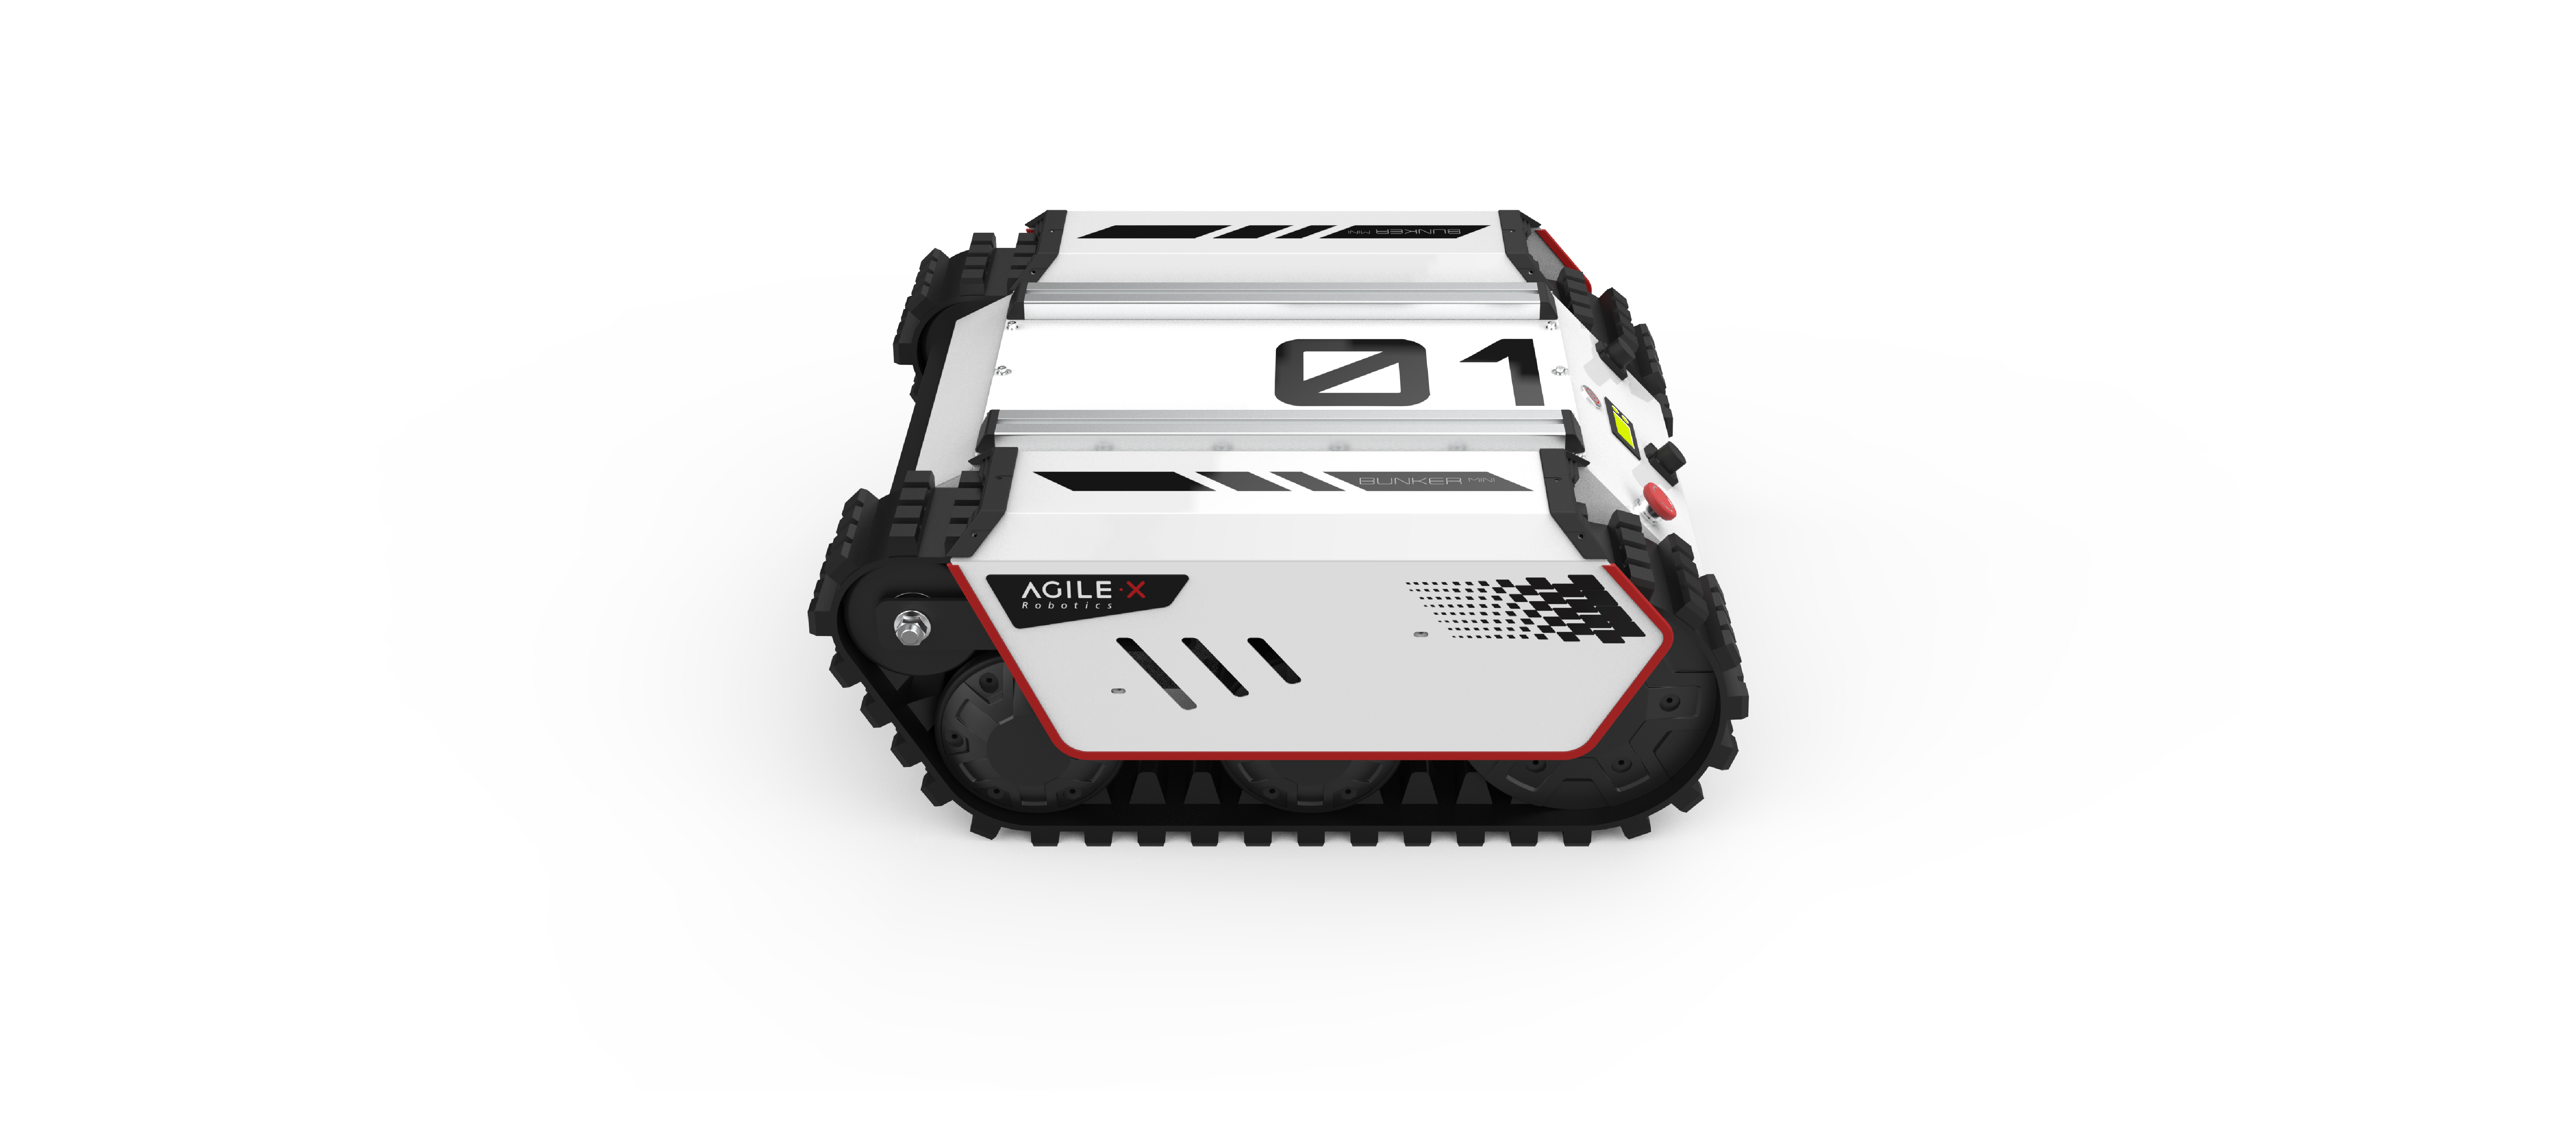  IP67 Tracked Mobile Robot